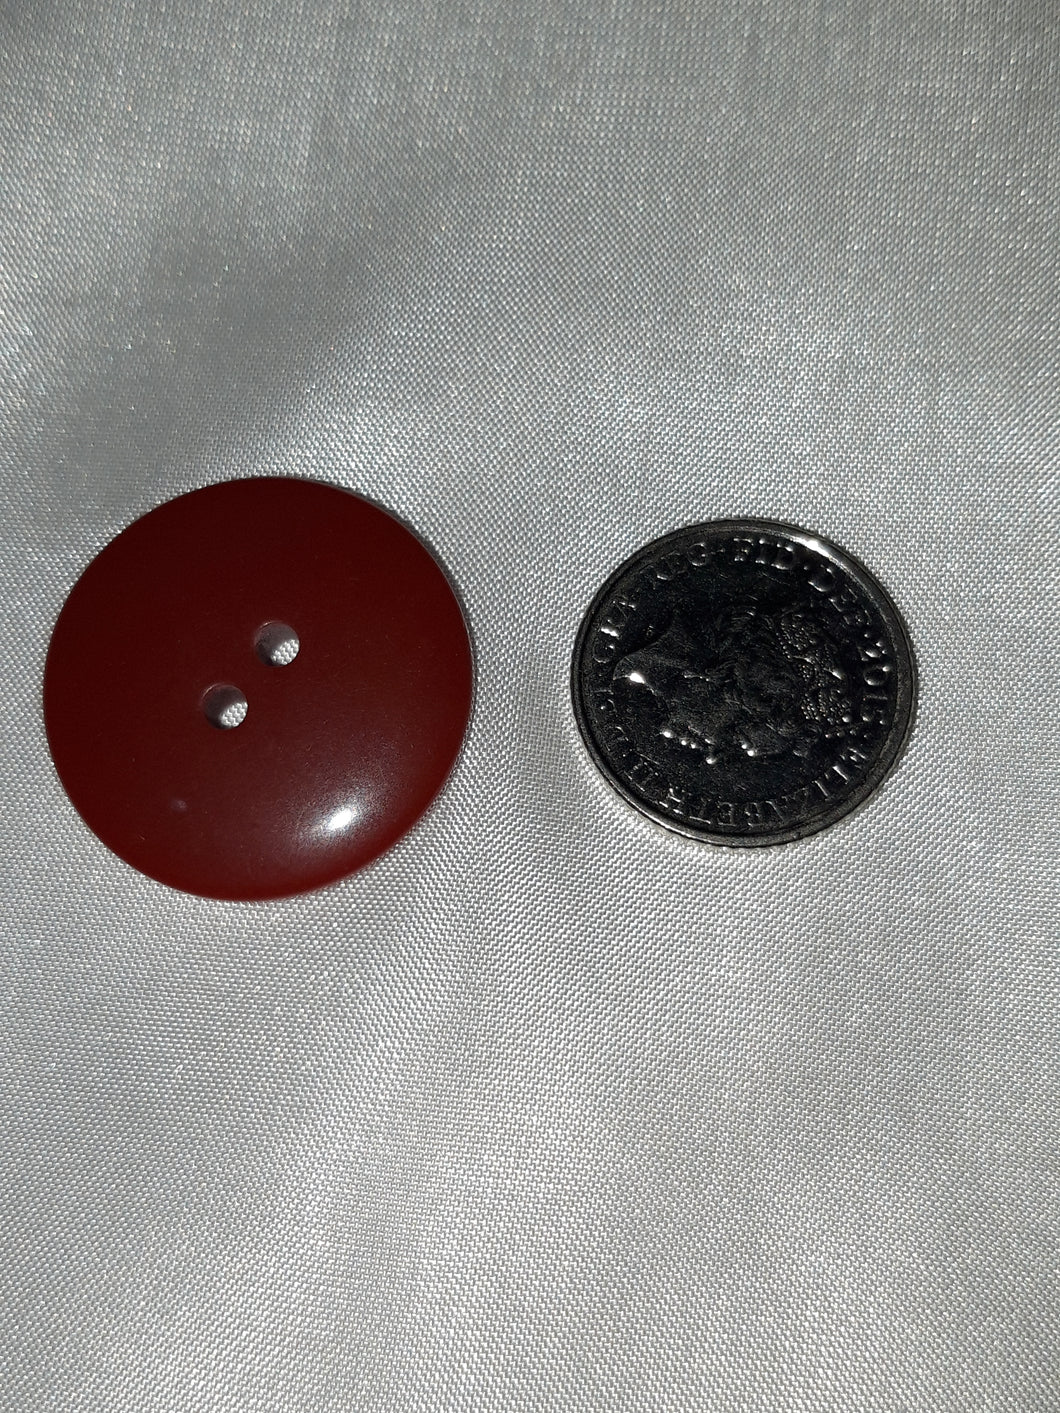 Large Rust Coloured Button